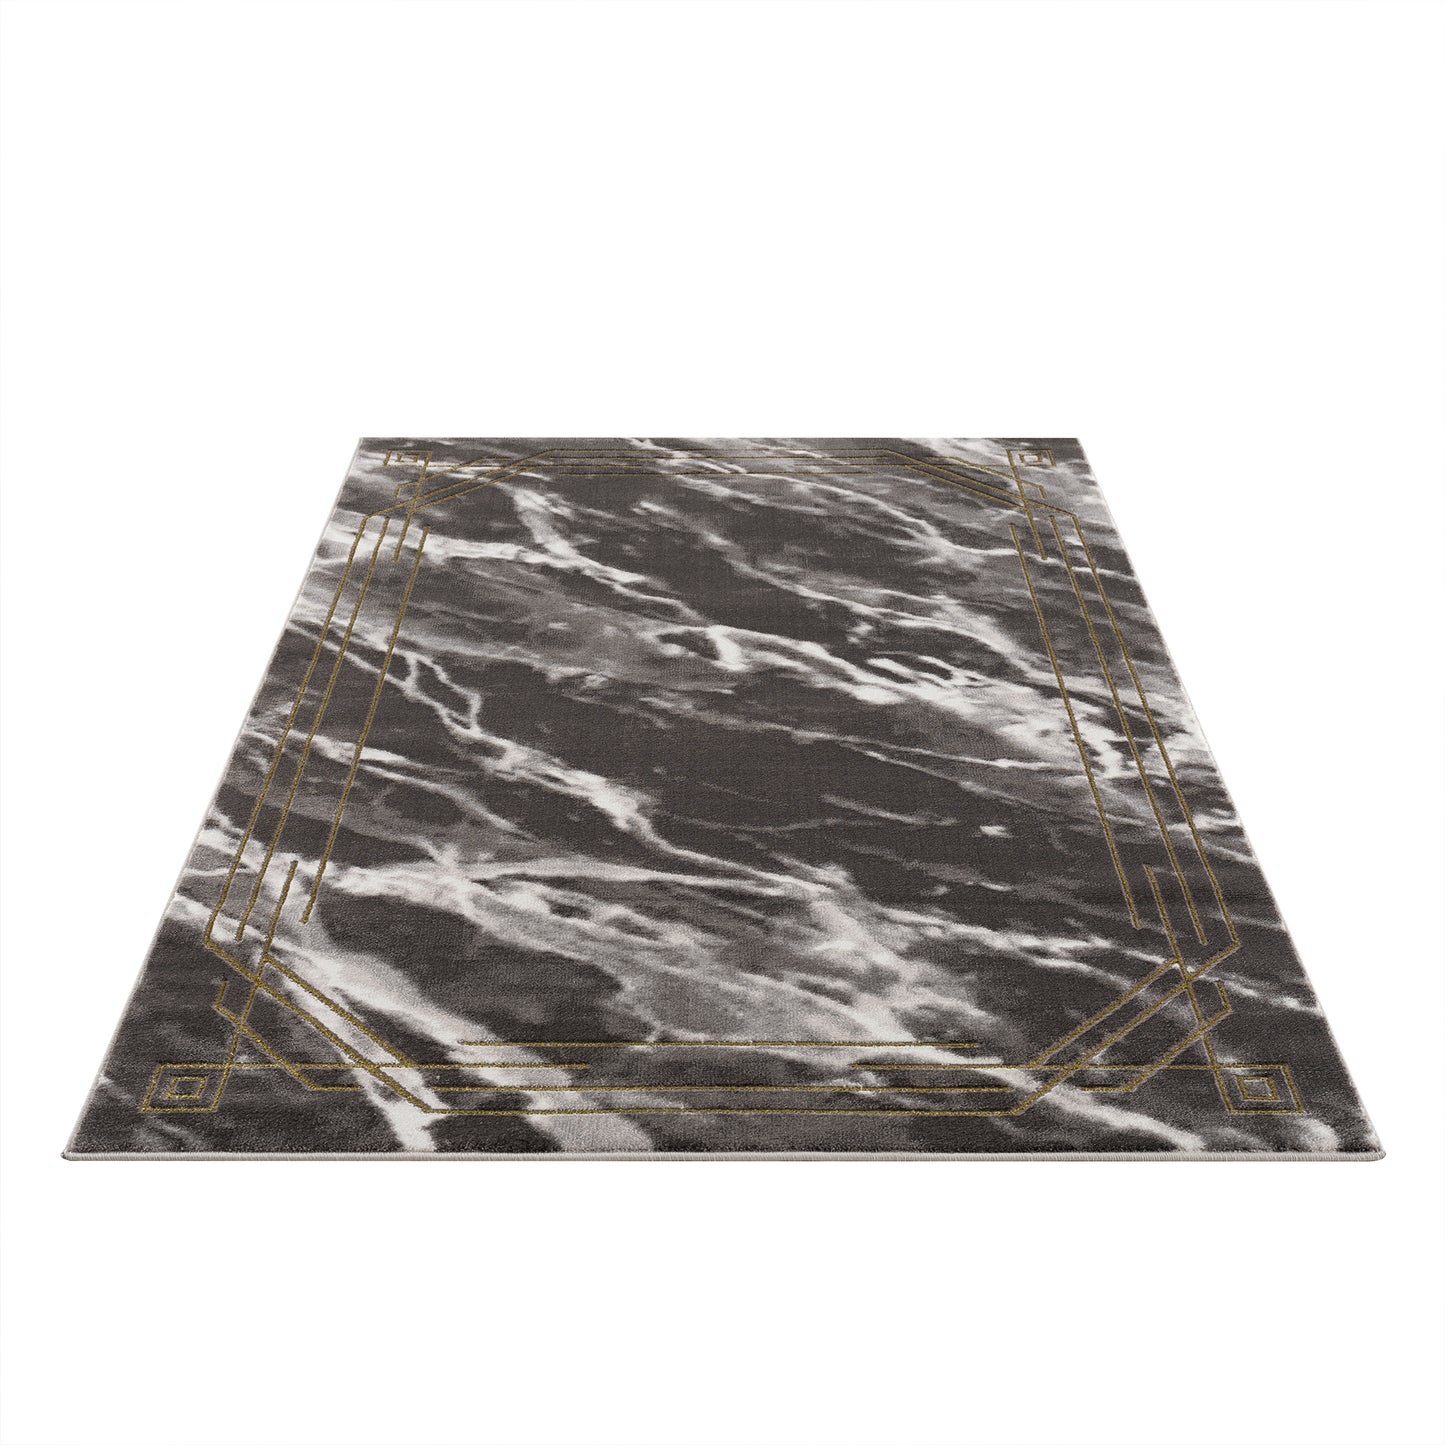 la dole rugs modern minimalistic marble pattern abstract rustic grey charcoal gold bordered area rug 8x10, 8x11 ft Large Living Room Carpet, Bedroom, Kitchen